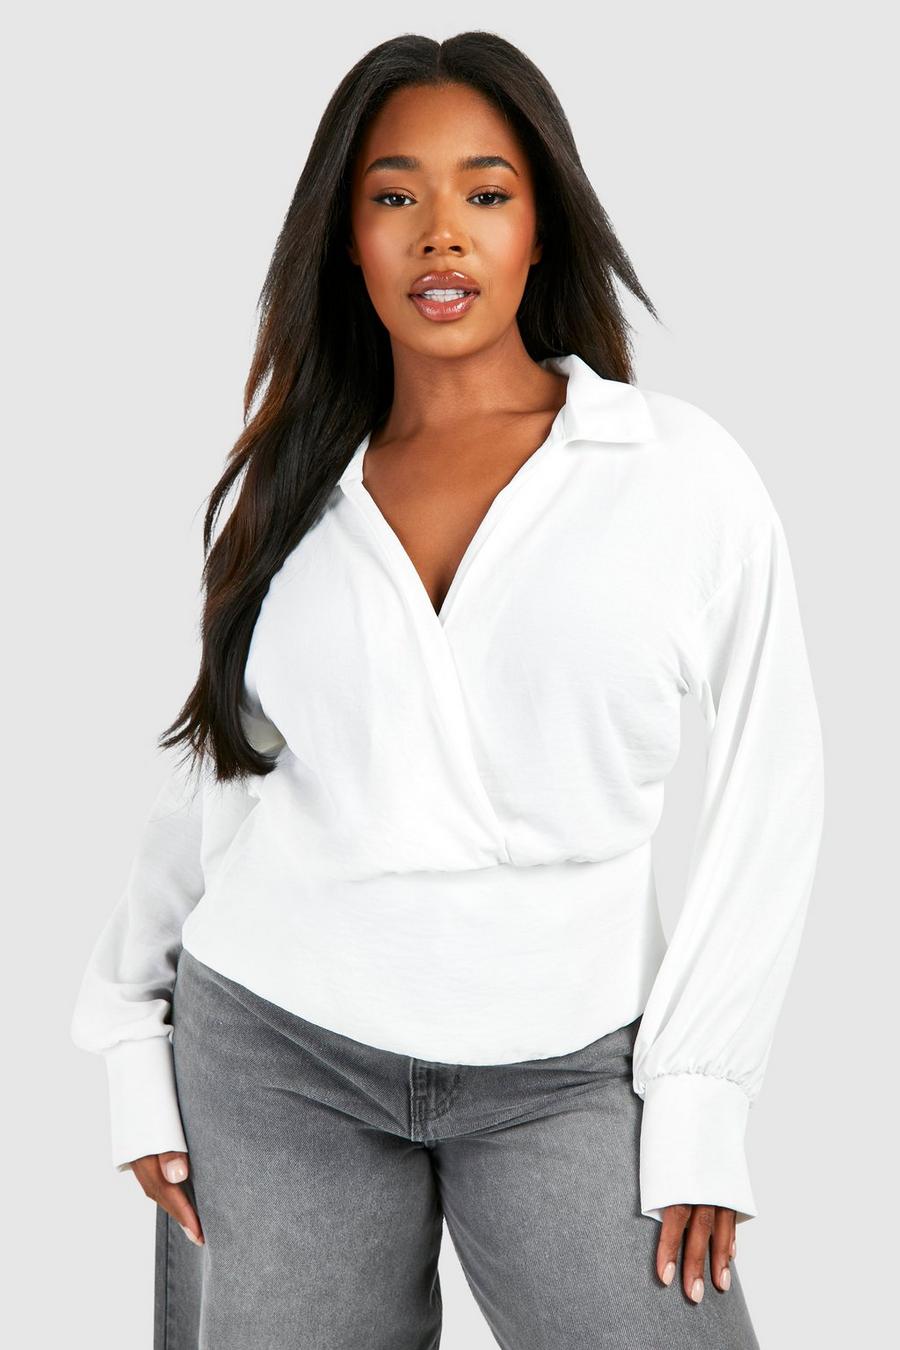 Final Sale Plus Size One Shoulder Peplum Top in White